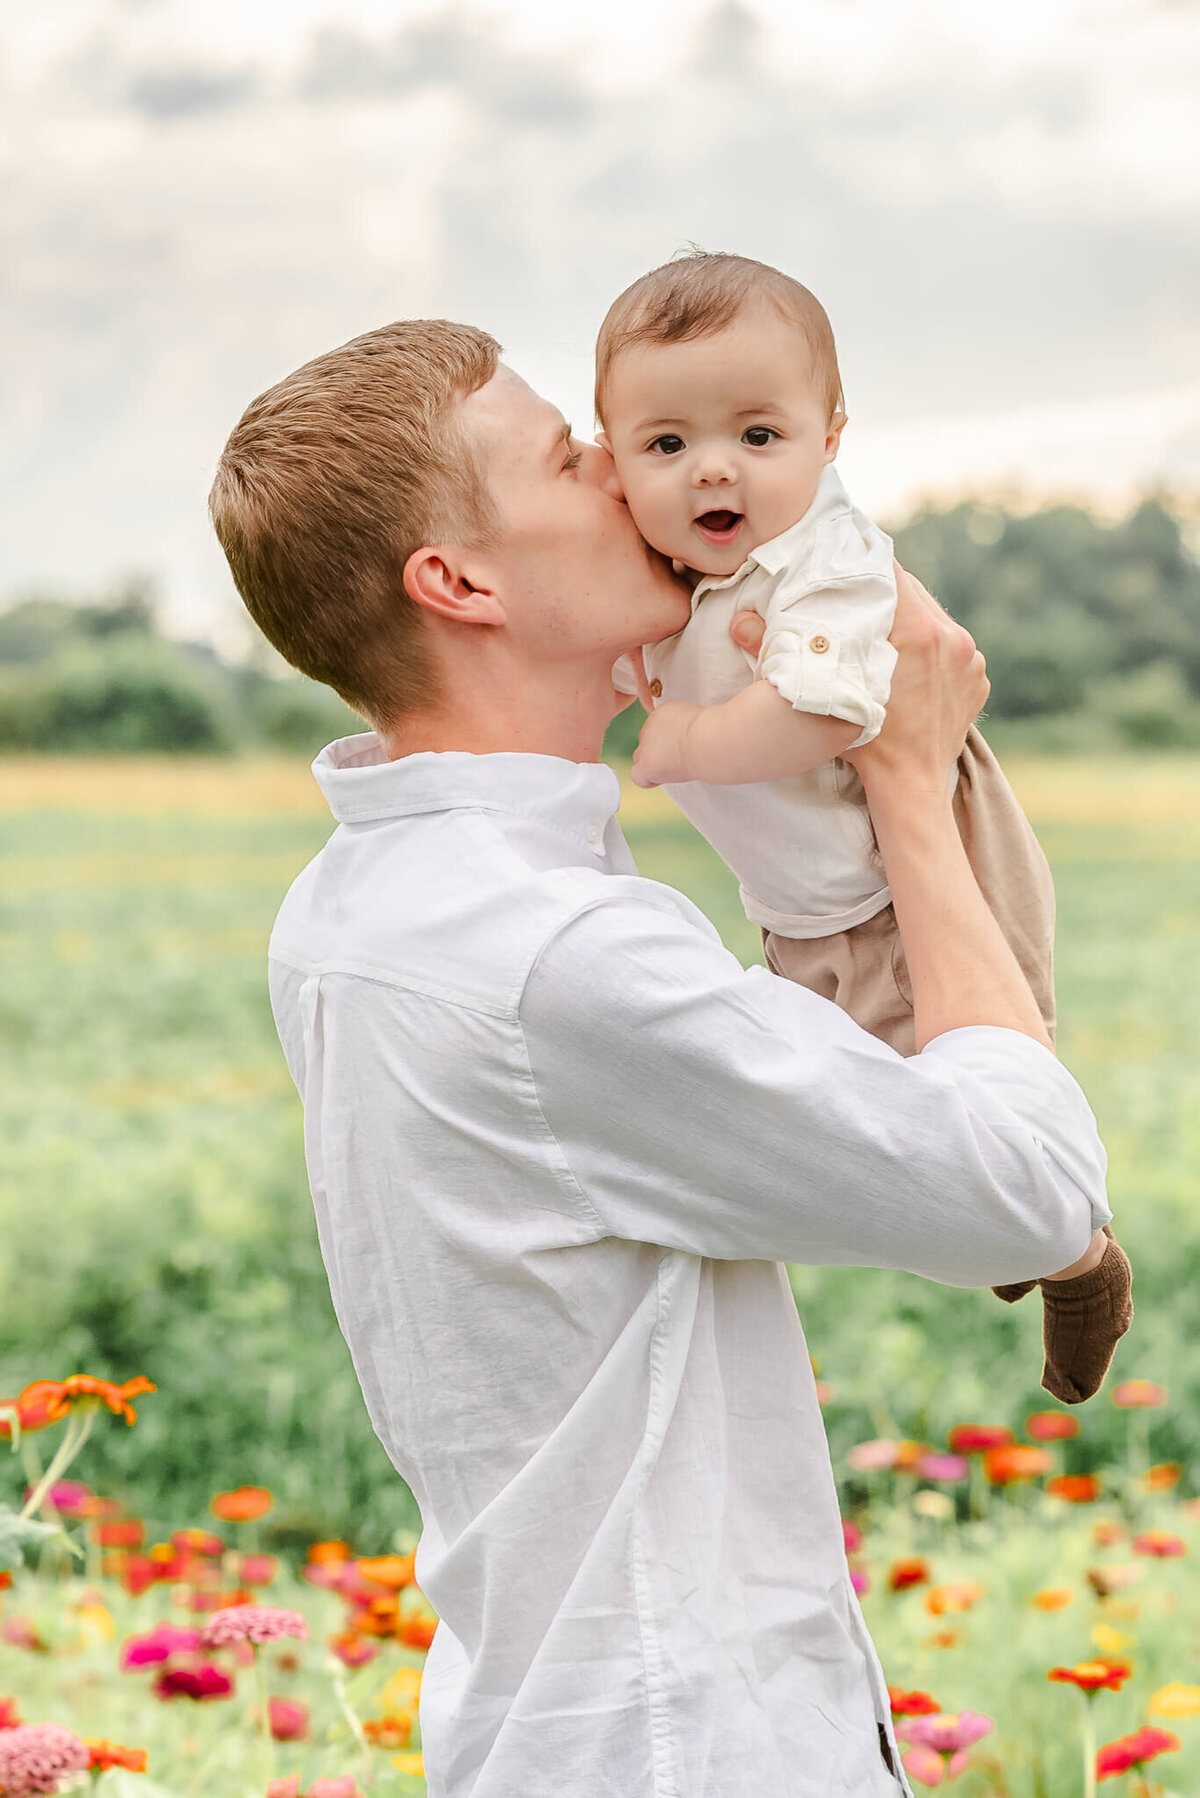 A man wearing a white shirt holds up his infant son and gives him a kiss on the cheek. Image by Justine Renee Photography in Hampton Roads.